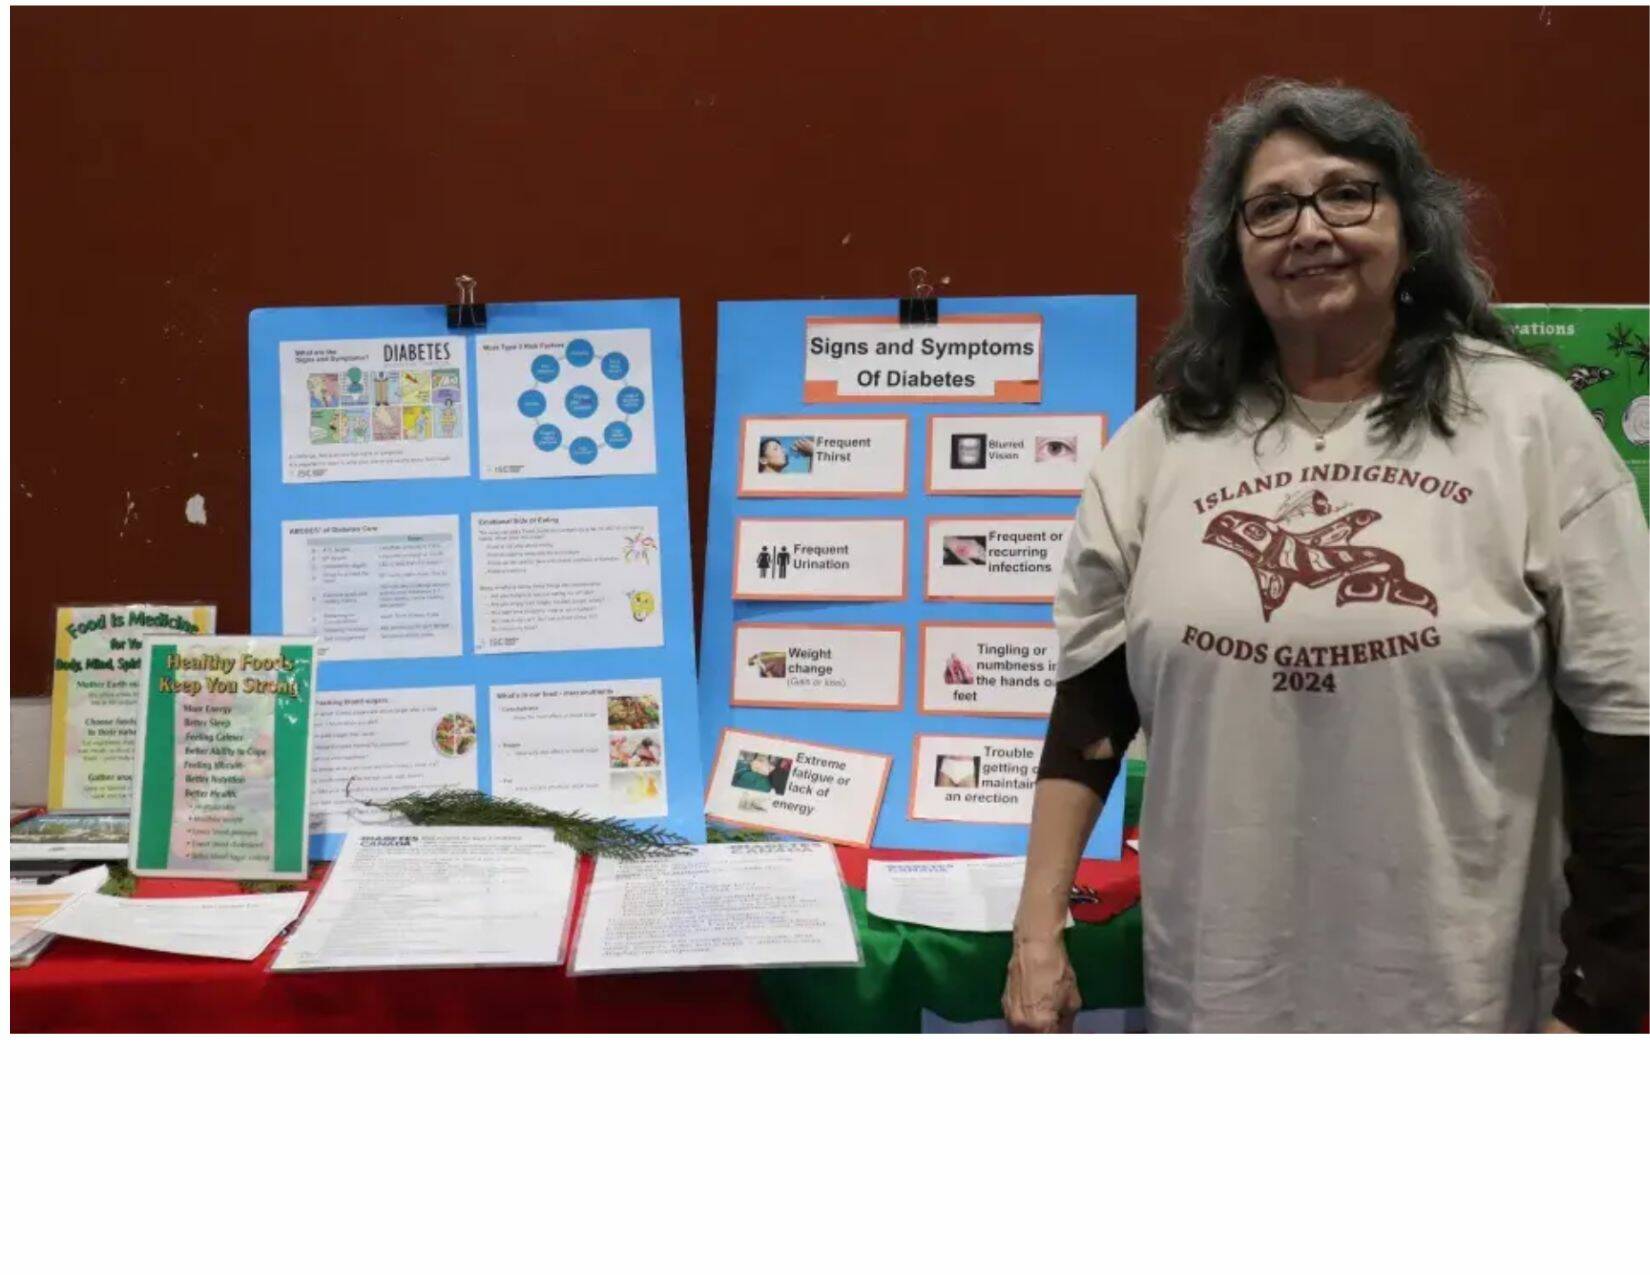 Matilda Atleo, an Indigenous educator in diabetes for the First Nations Health Authority, shares diabetes information with attendees at Ahousaht’s Food Sovereignty Event in late March. (Alexandra Mehl photo)